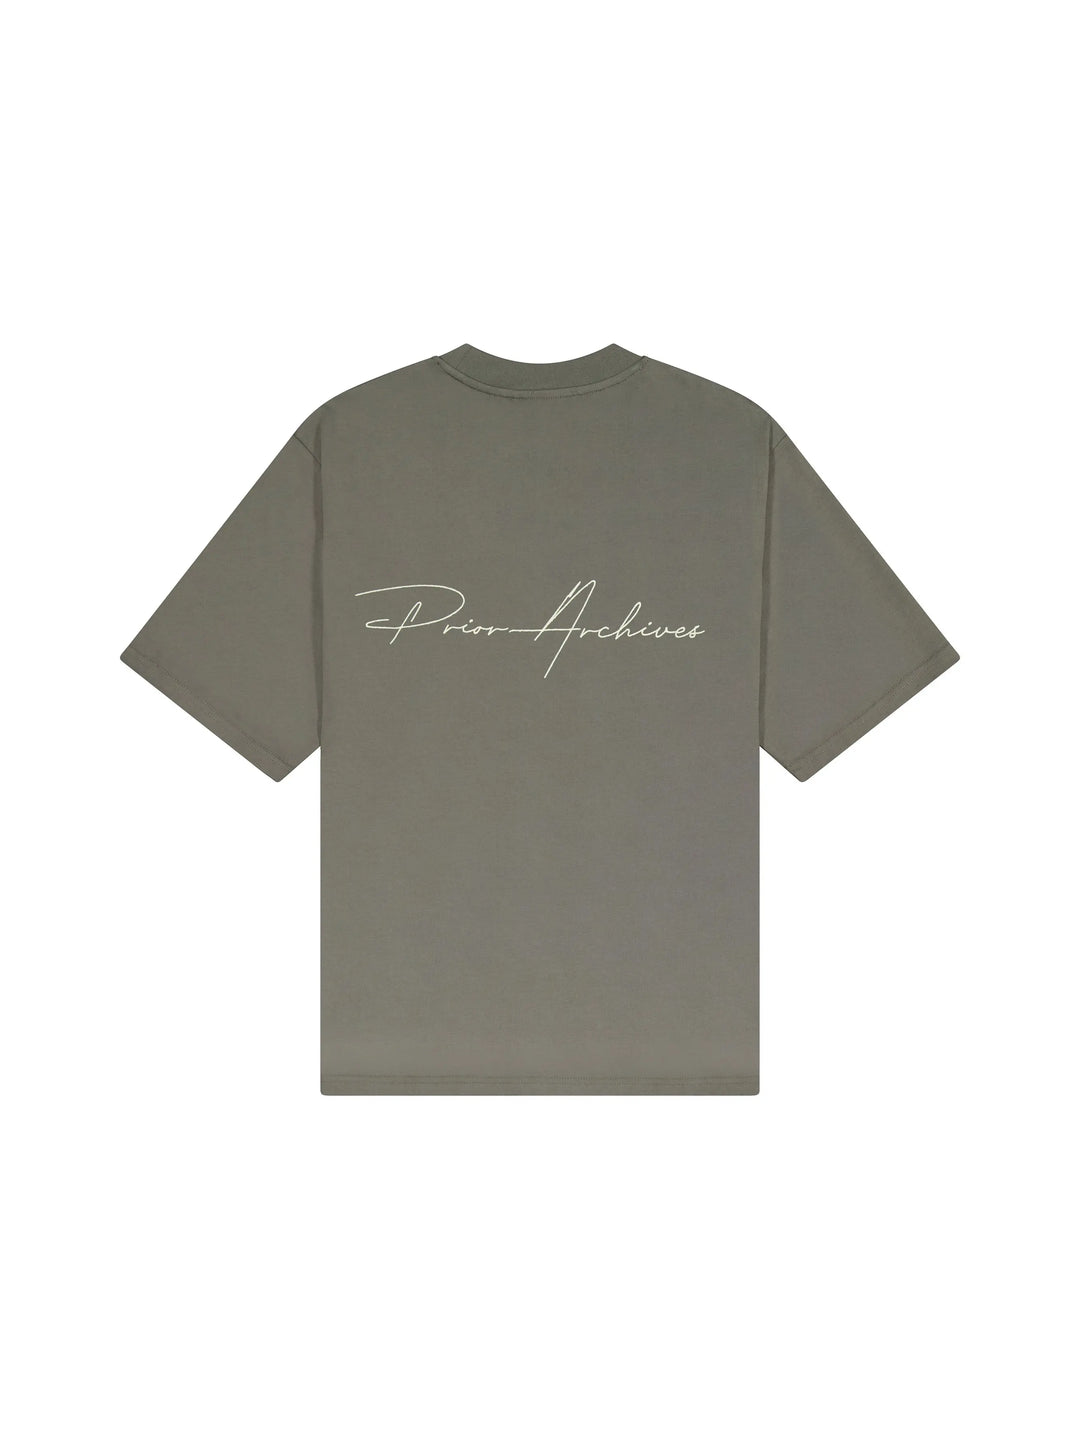 Prior Embroidery Logo Oversized T-shirt Medium Olive in Auckland, New Zealand - Shop name